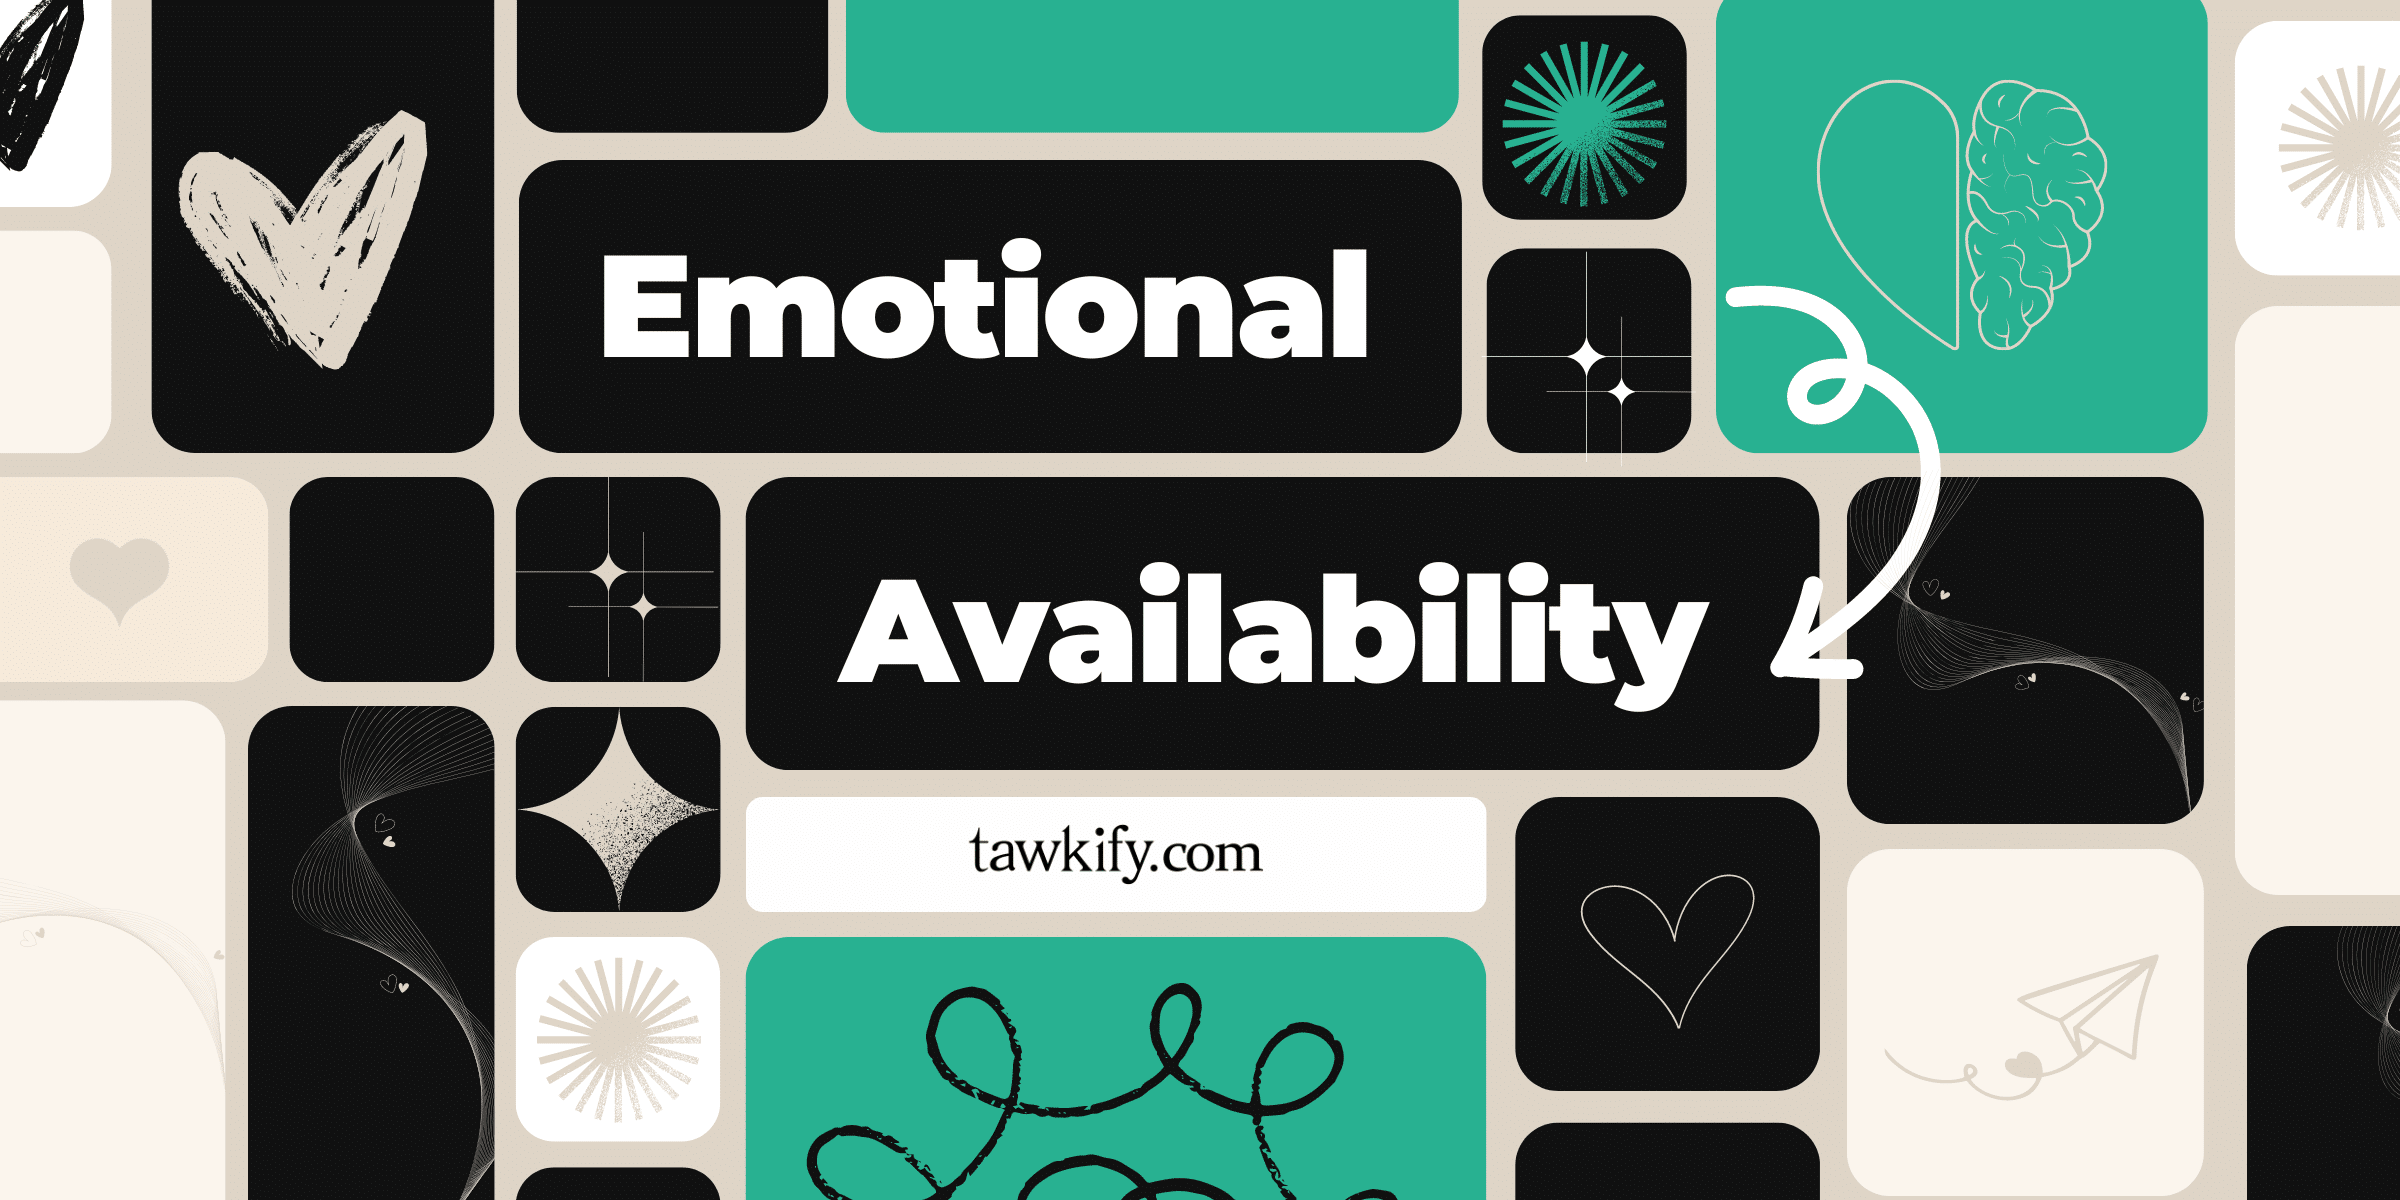 Emotional availability is one of the best qualities of a good romantic partner. But how do you know if you and your partner have it? Follow our guide to find out more!